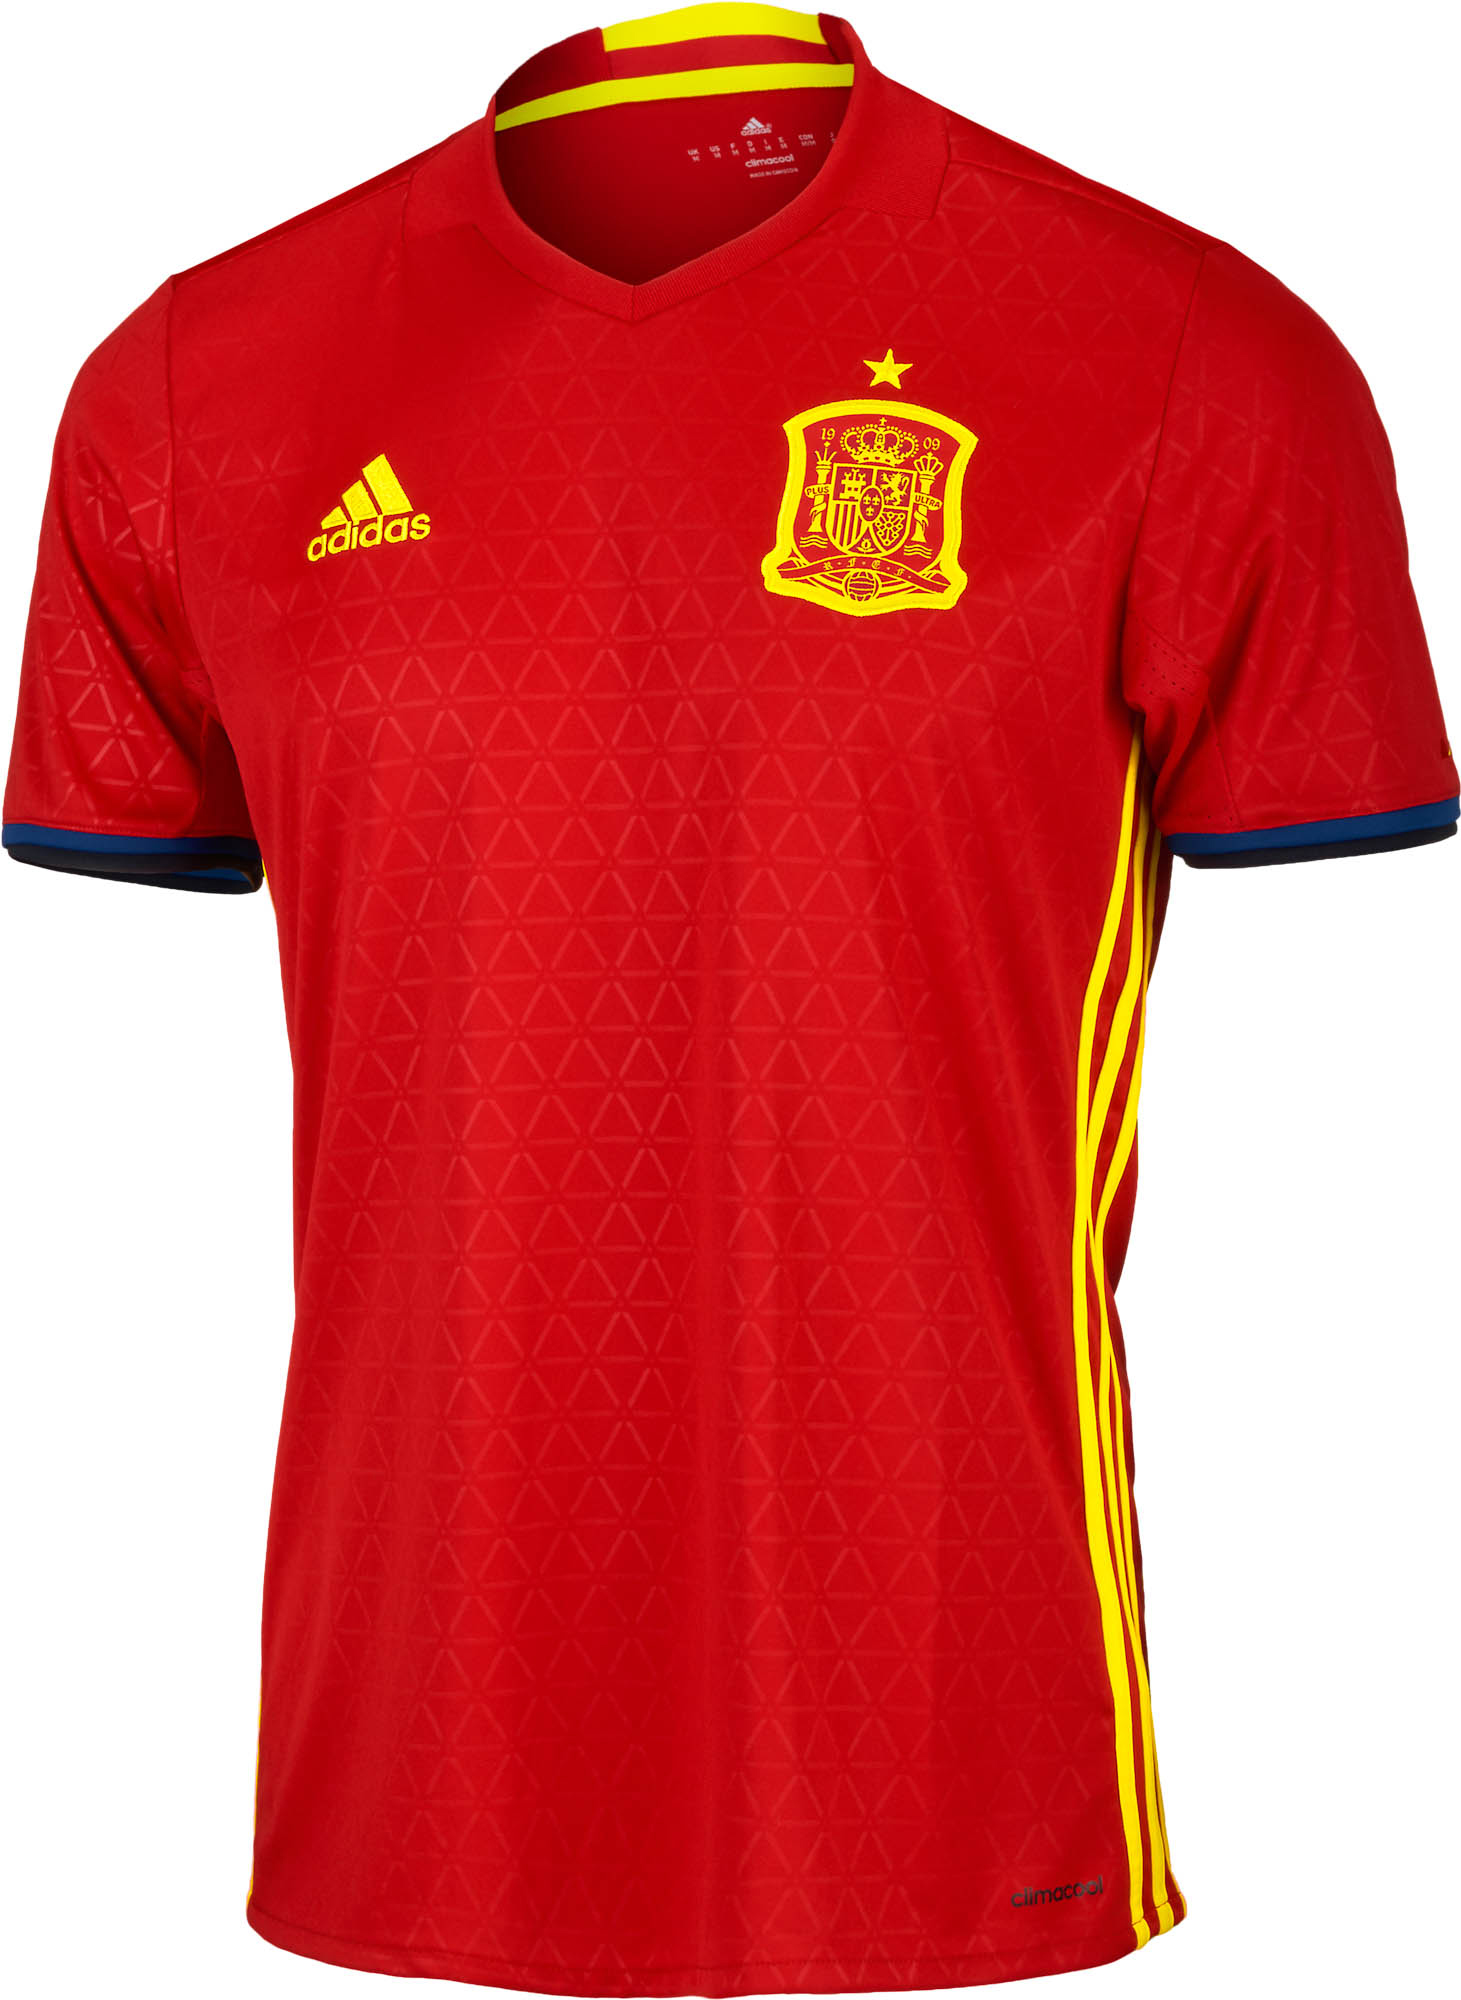 spain soccer jersey,Save up to